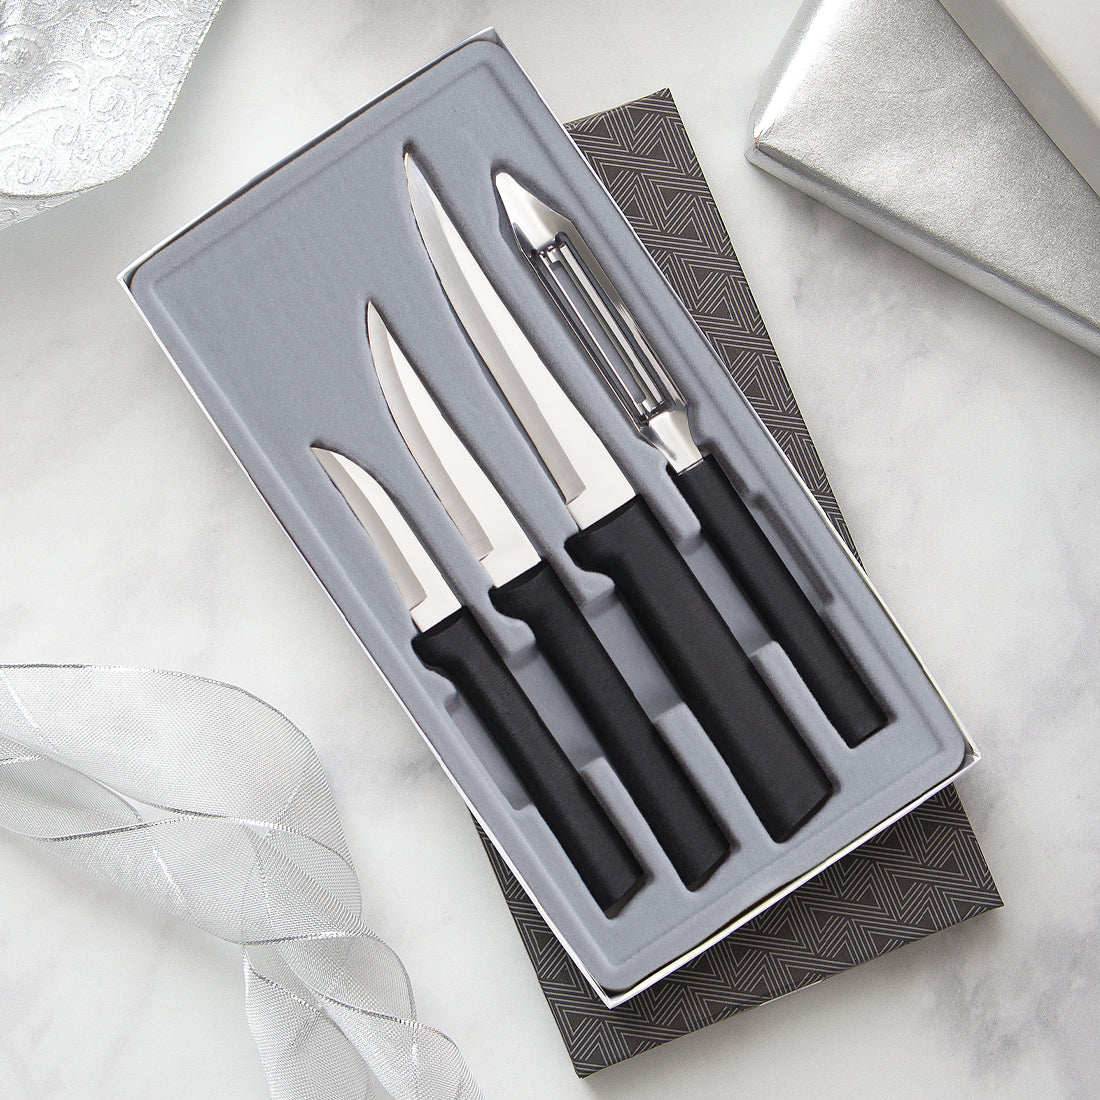 Cook's Choice Gift Set